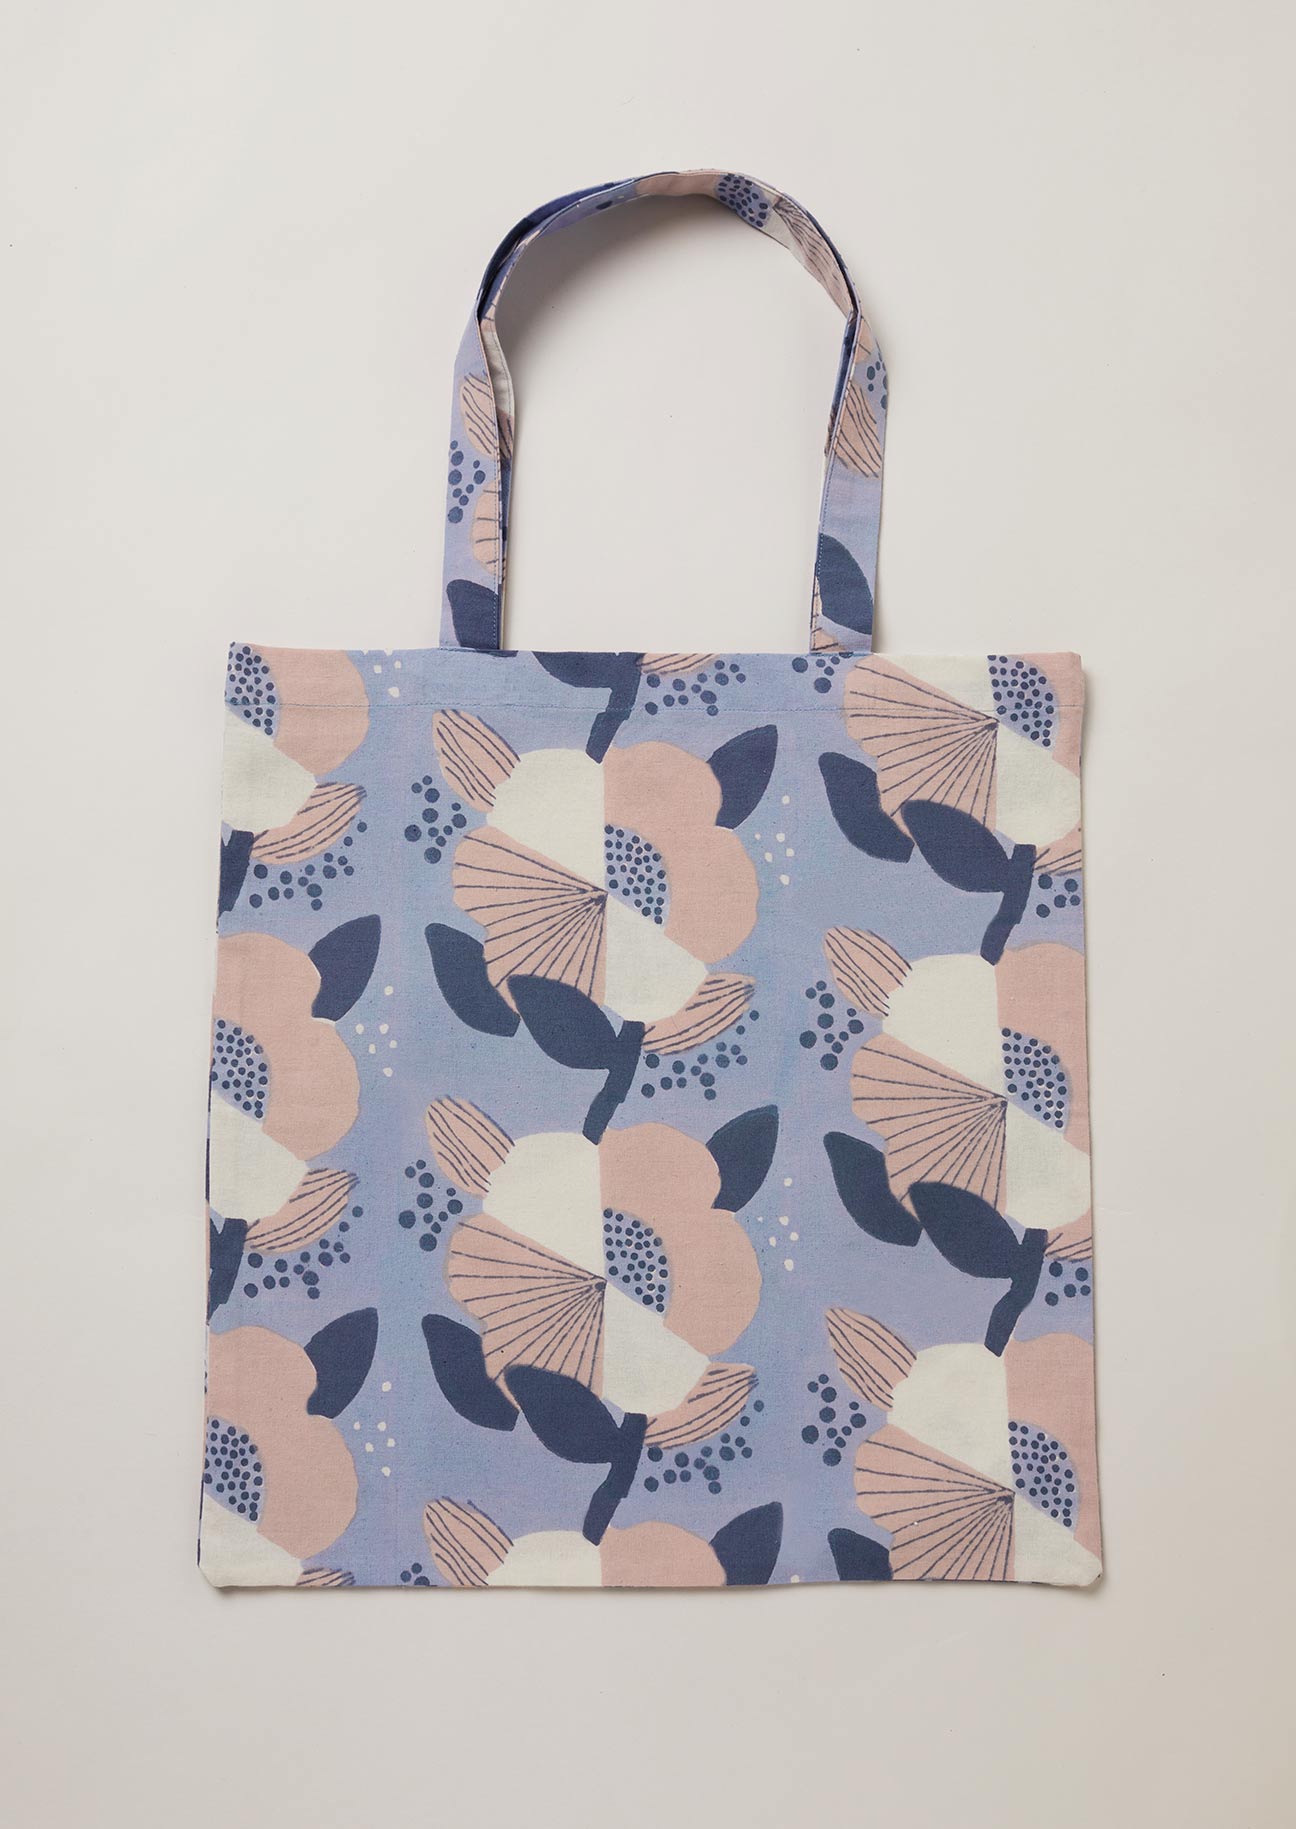 White, navy, dusty pink and pale blue block printed floral design on tote bag to match kimono.